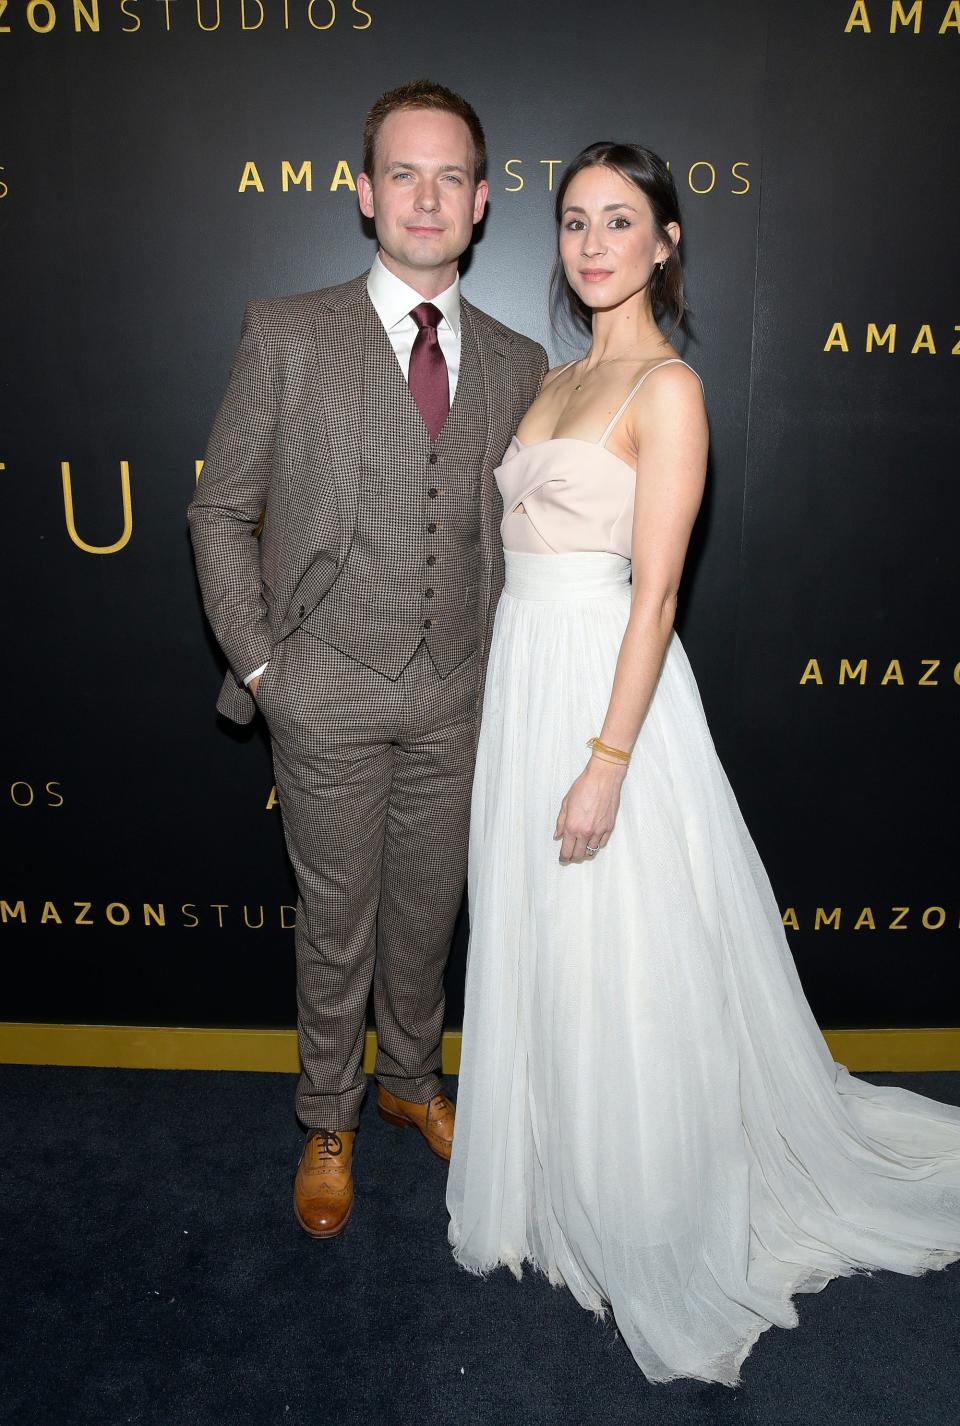 Patrick J. Adams and Troian Bellisario attend the Amazon Studios Golden Globes after party at The Beverly Hilton Hotel on January 05, 2020